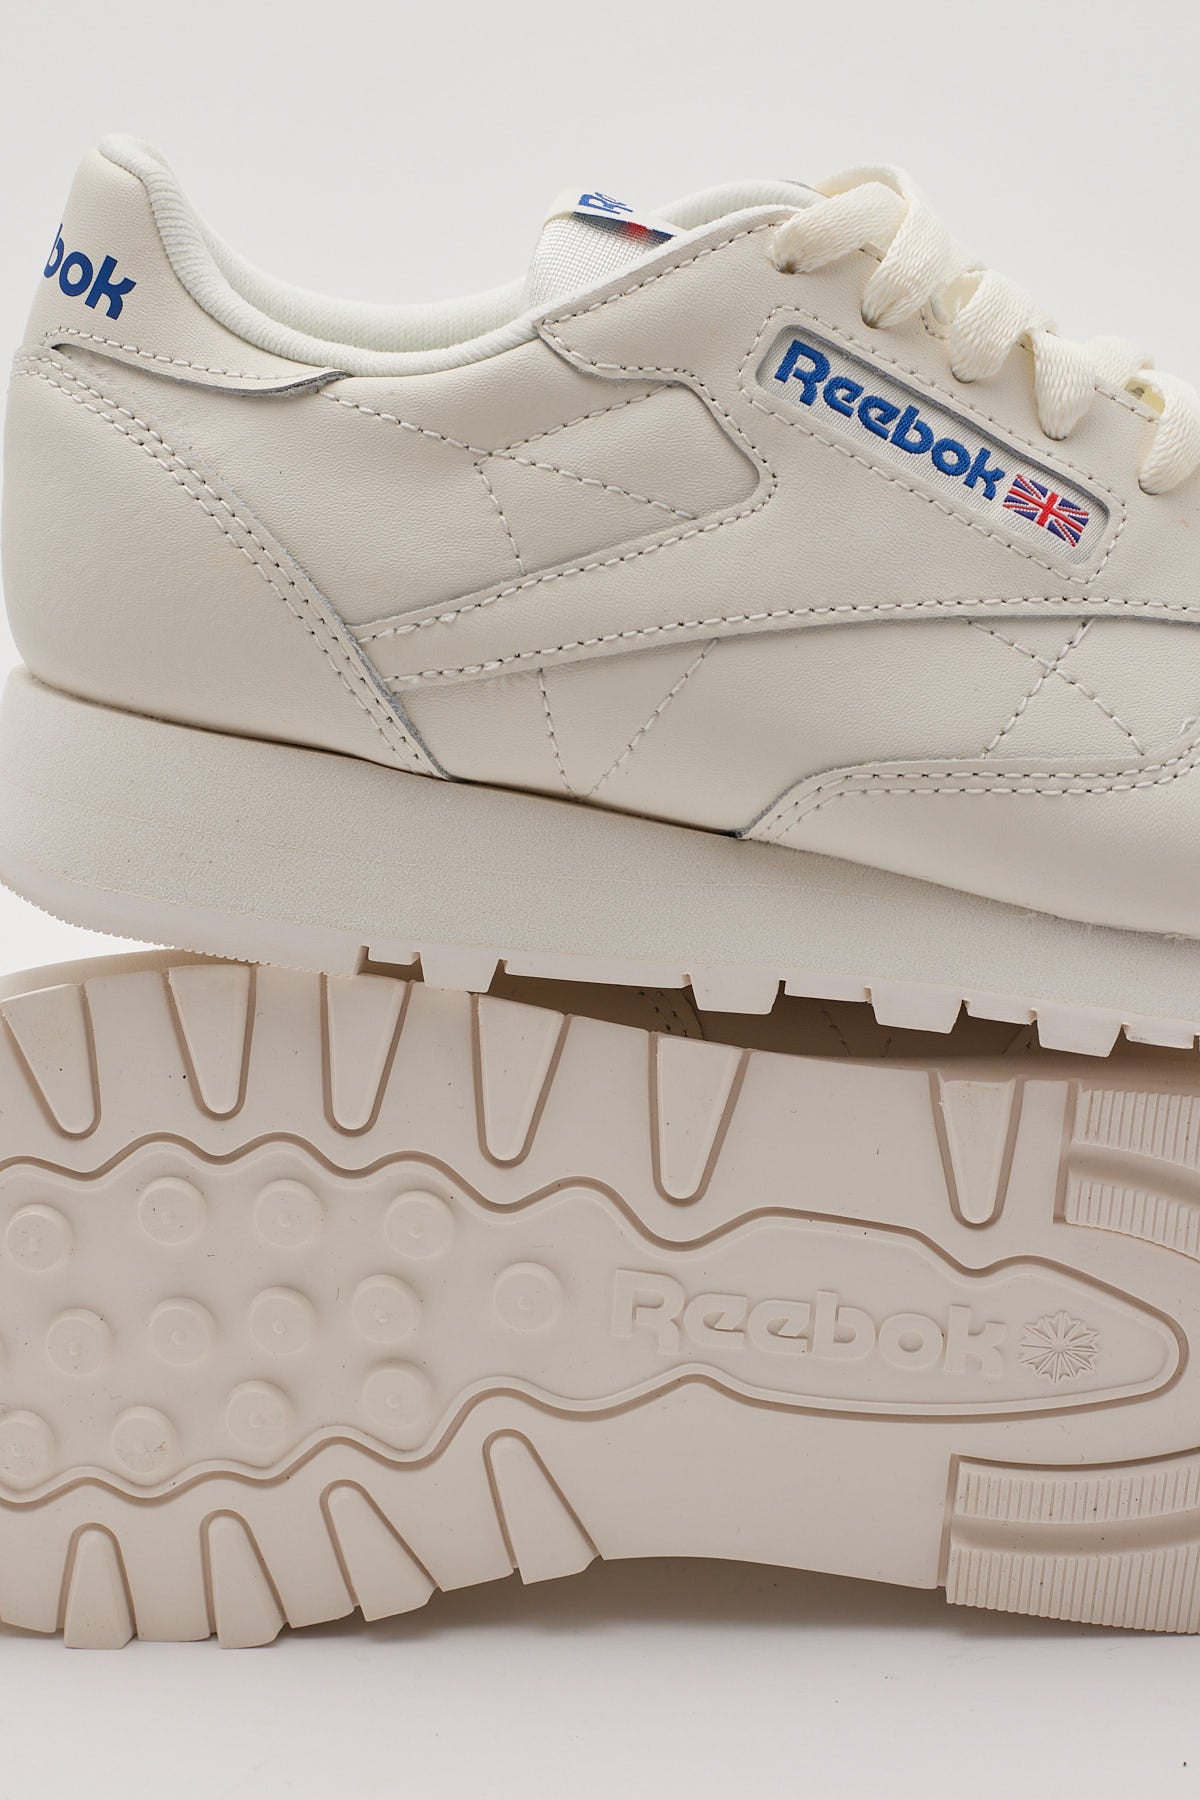 Reebok Classic Leather Vector Red/Blue